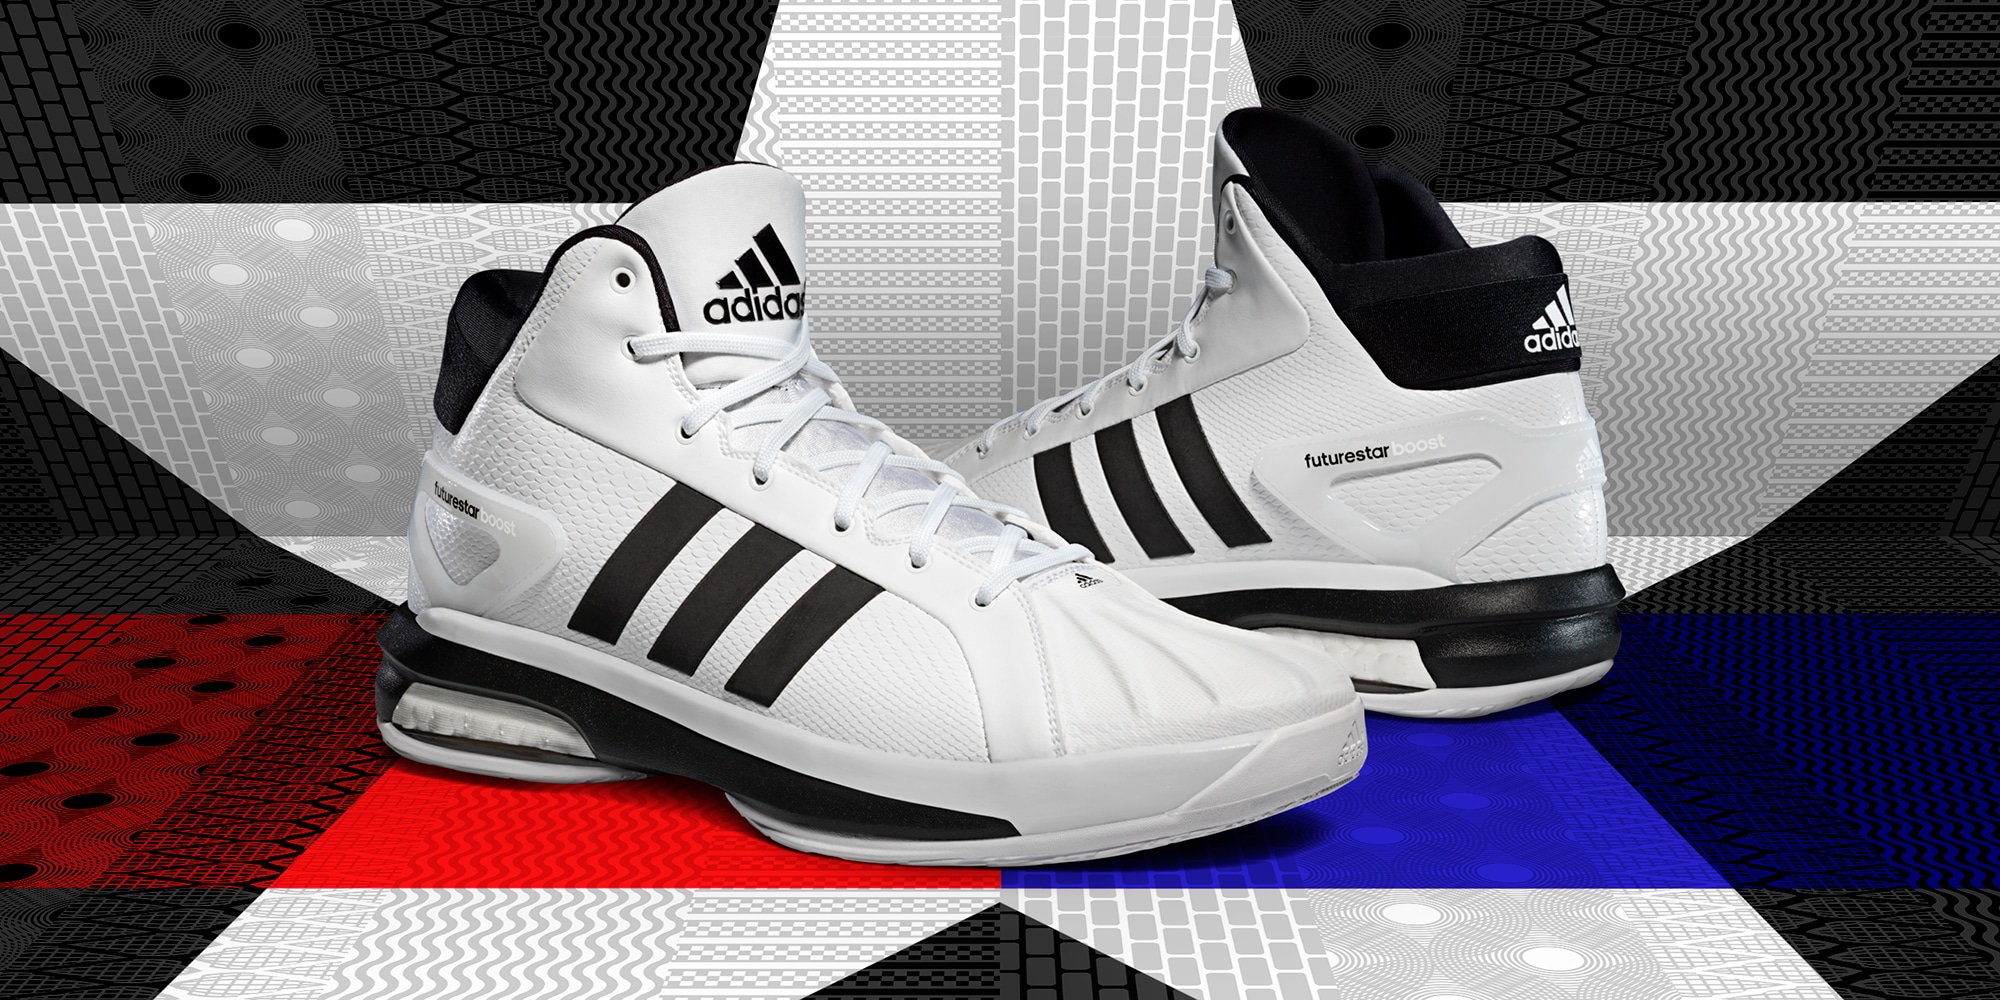 adidas Unveils The Futurestar Boost for NBA All-Star Weekend - WearTesters